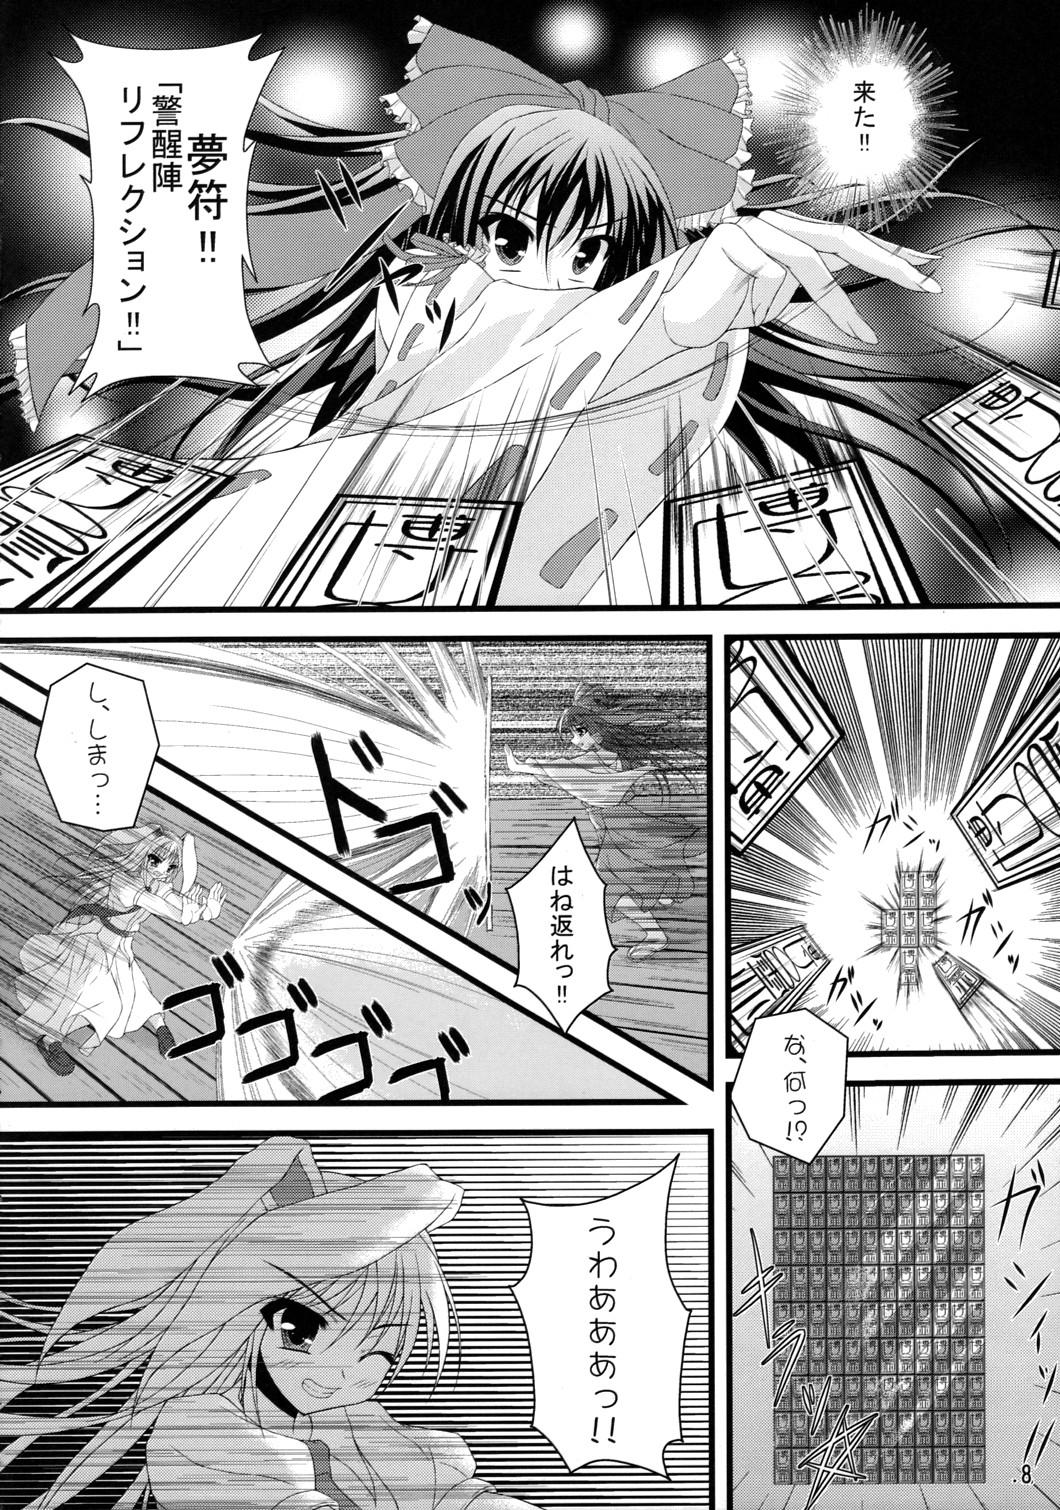 Freak Tele-Mesmerism - Touhou project Anal Play - Page 7